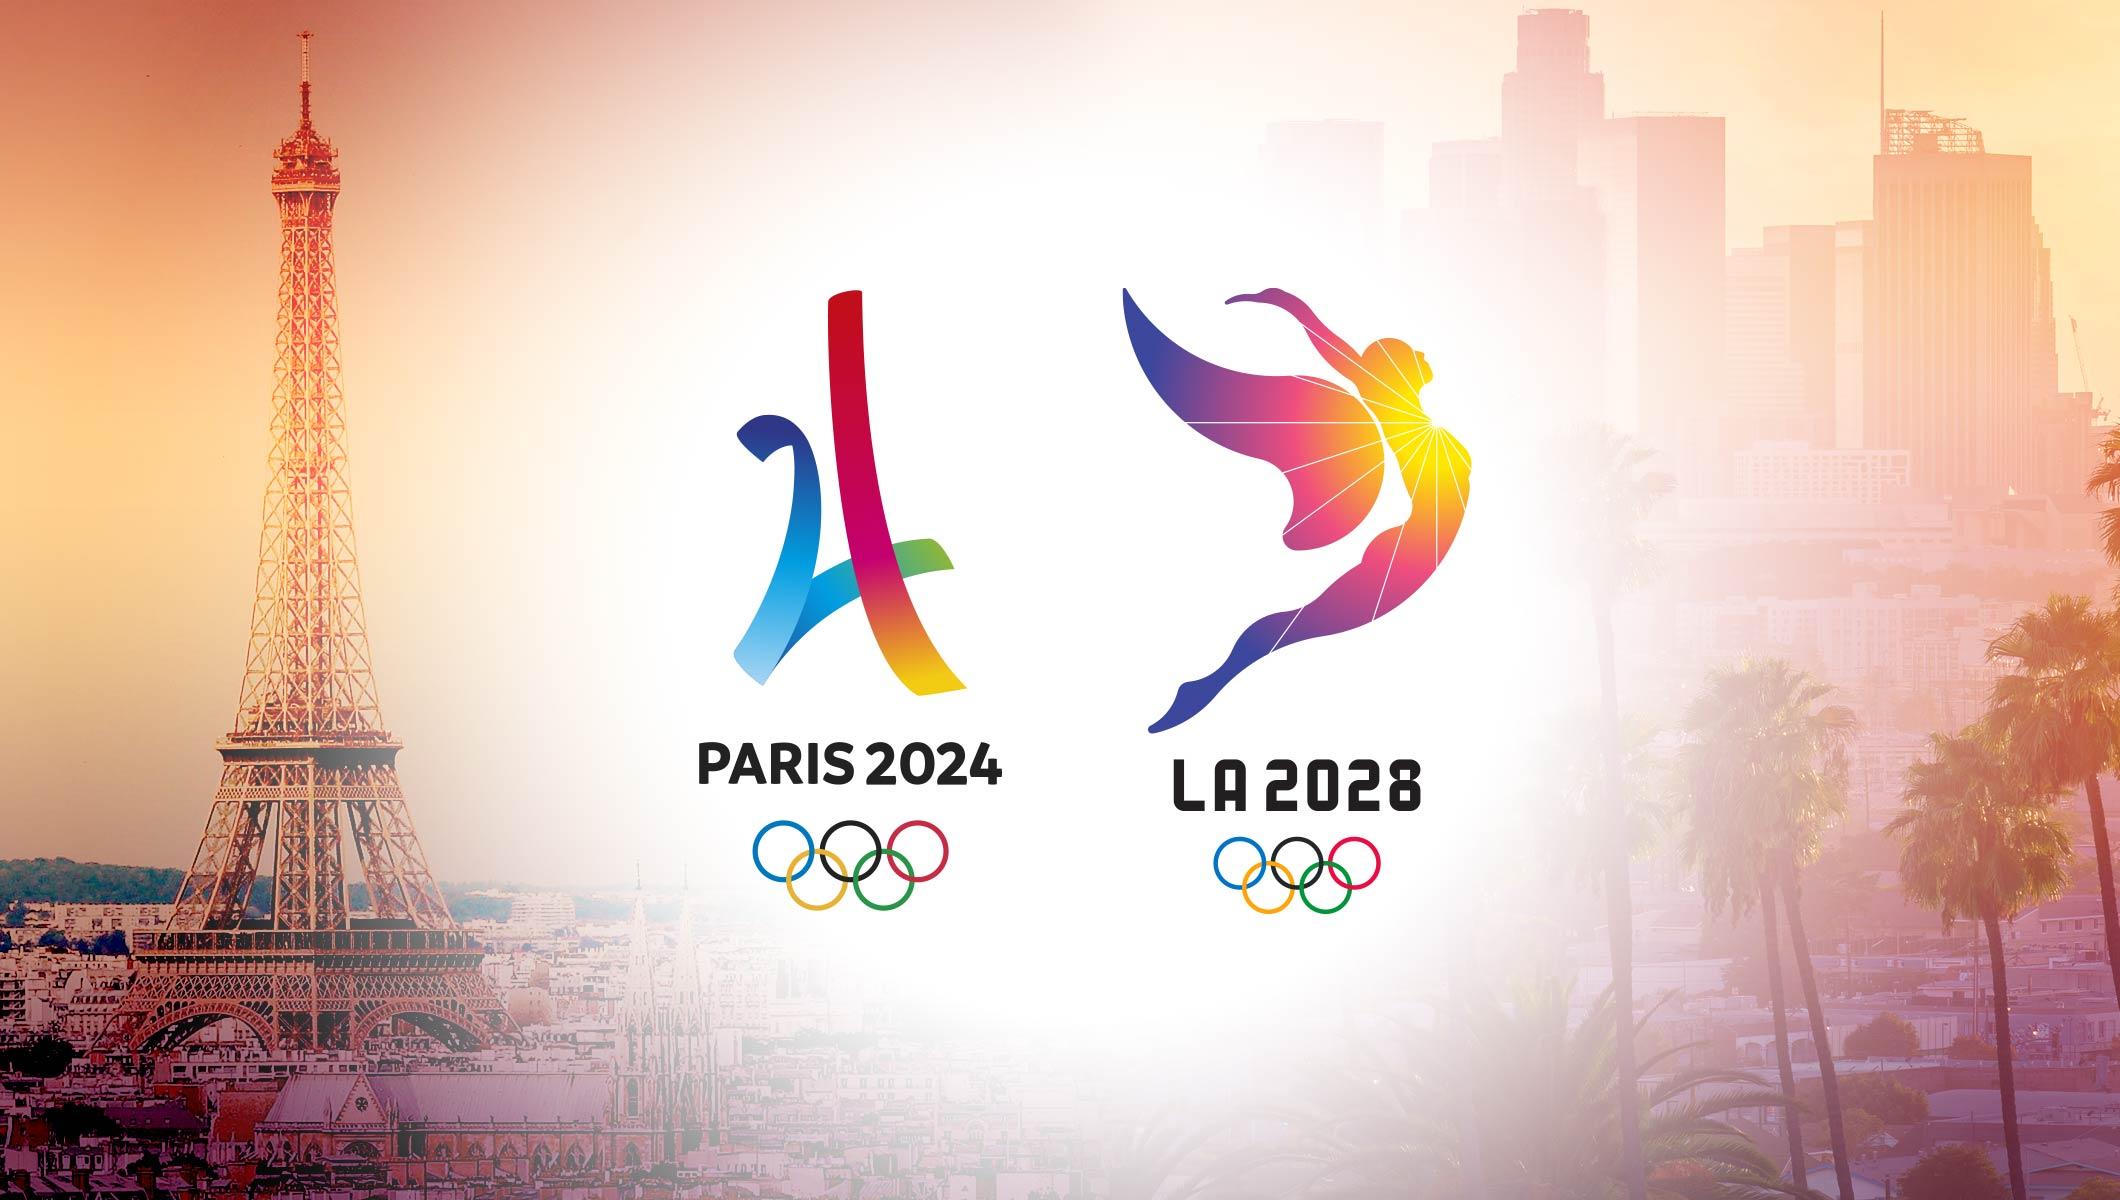 LA 2028 Summer Olympics Olympic Games in